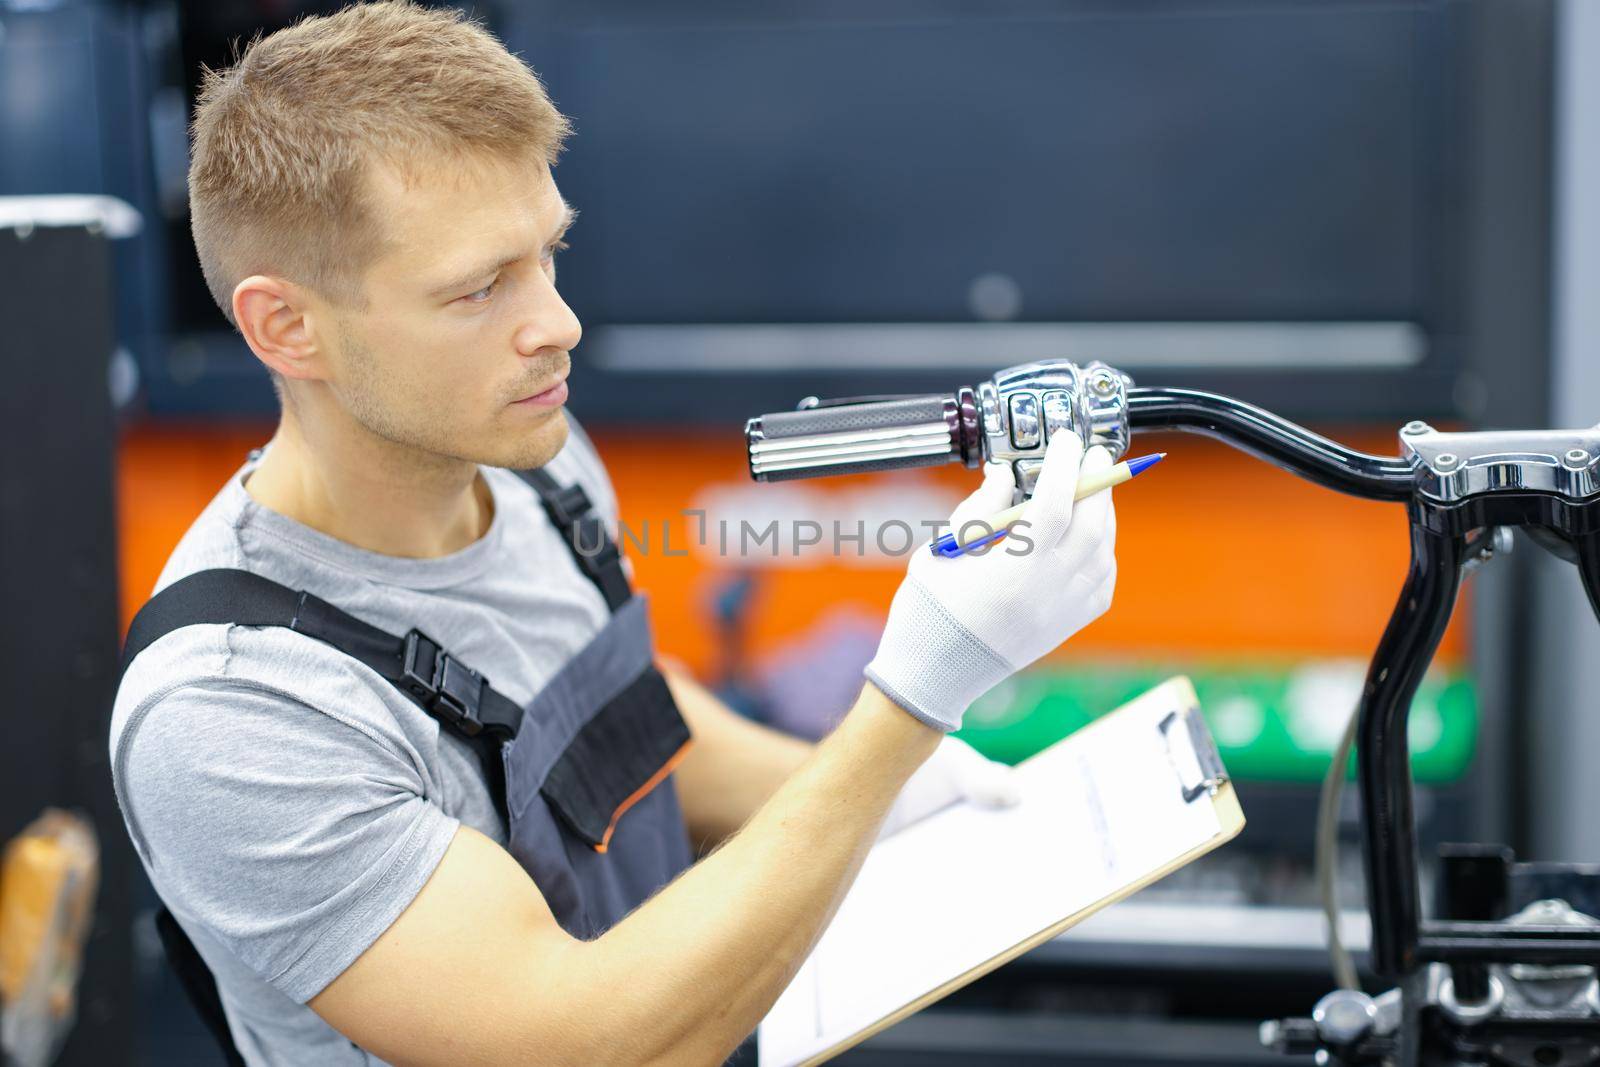 Young locksmith conducts diagnostics of motorcycle in service center. Motorcycle warranty service